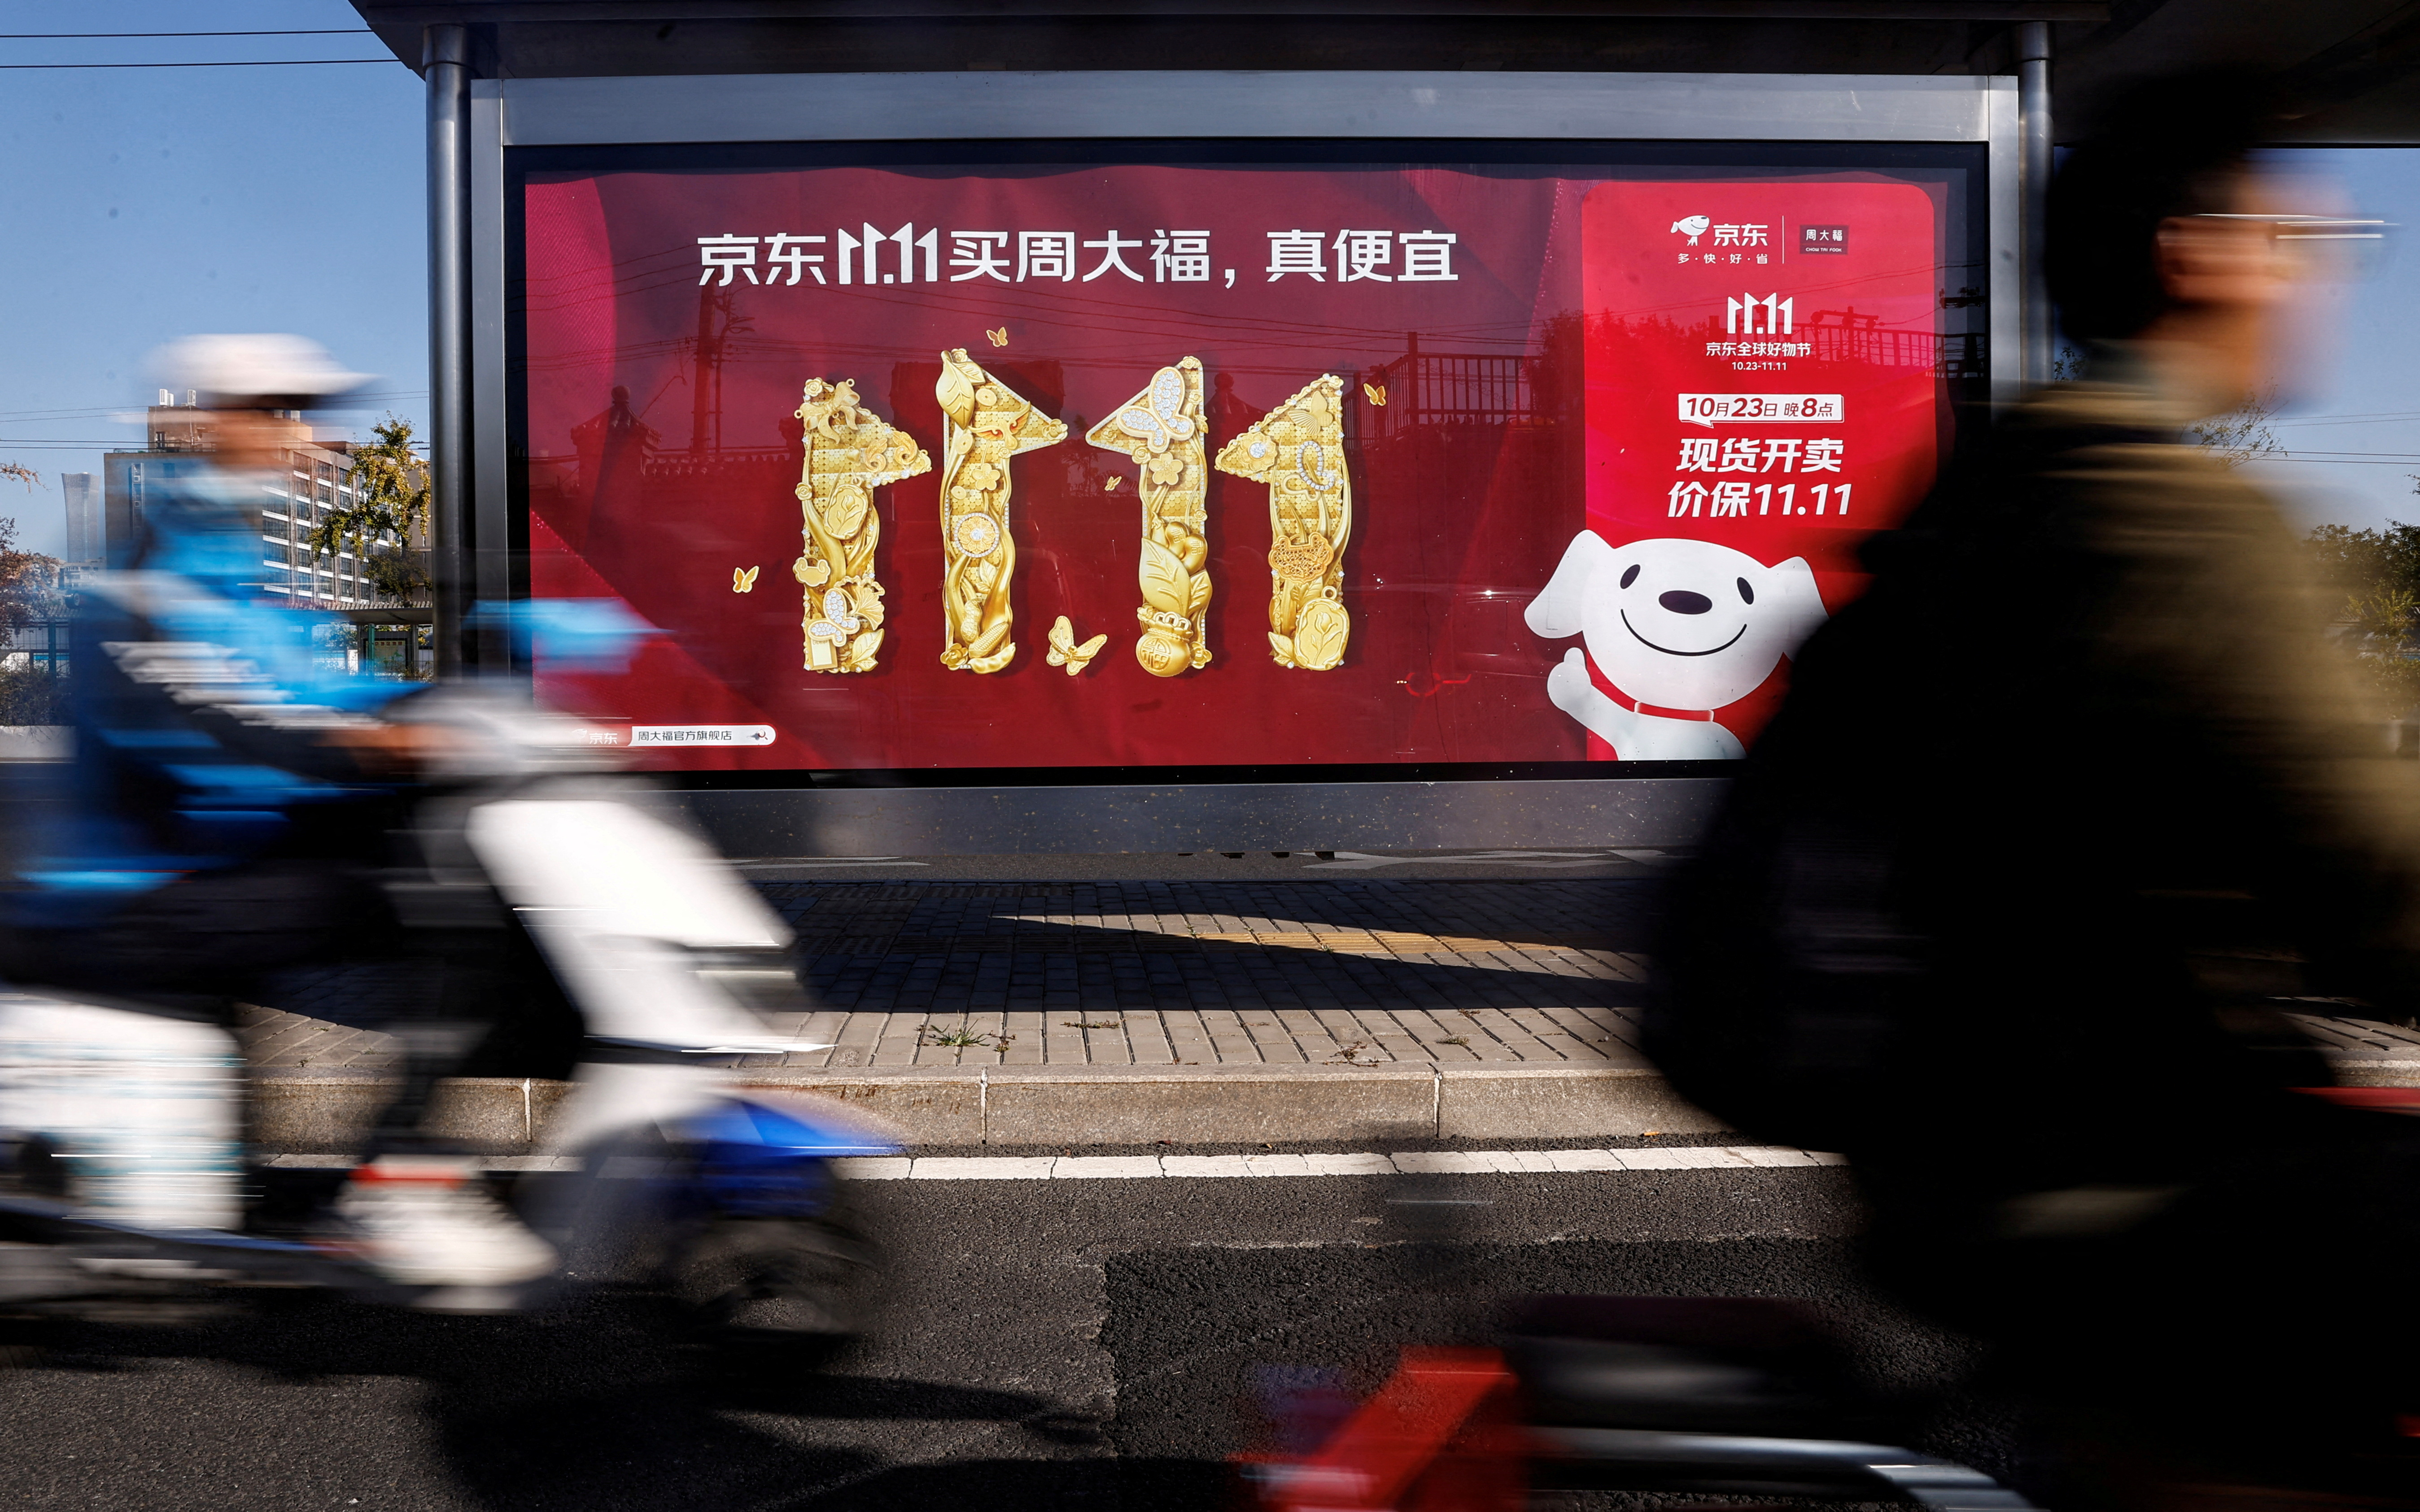 People ride on a scooter past a JD.com's advertisement promoting Singles Day shopping festival, in Beijing